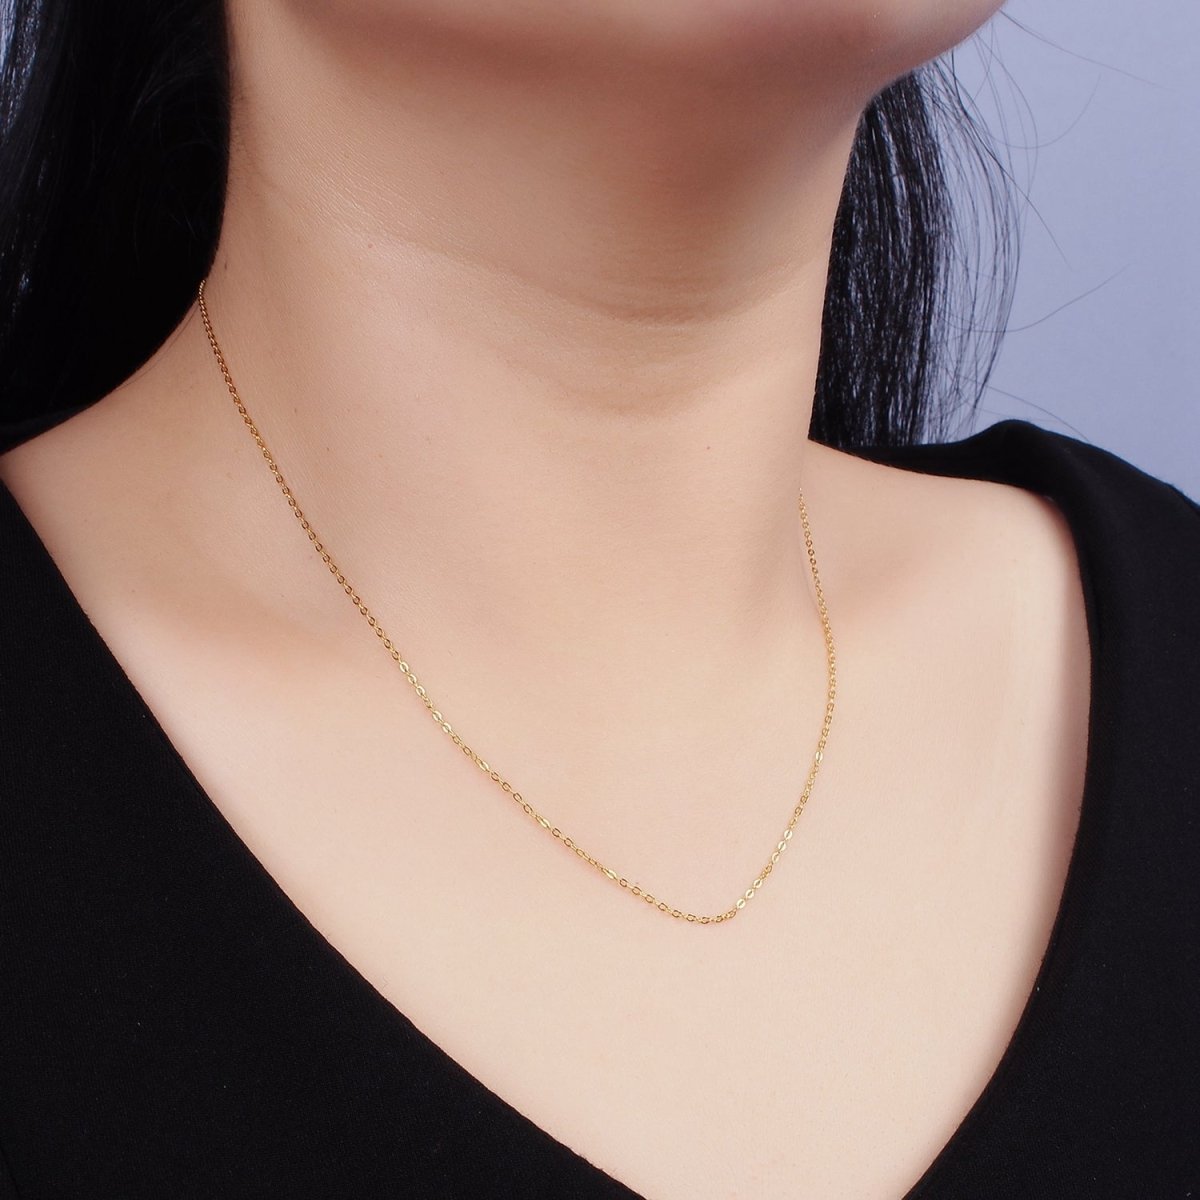 24K Gold Vermeil Cable Link Necklace Chain, 925 Sterling Silver Necklace Chain w/ Heavy 24K Gold Plated 18 inch | WA-1955 Clearance Pricing - DLUXCA